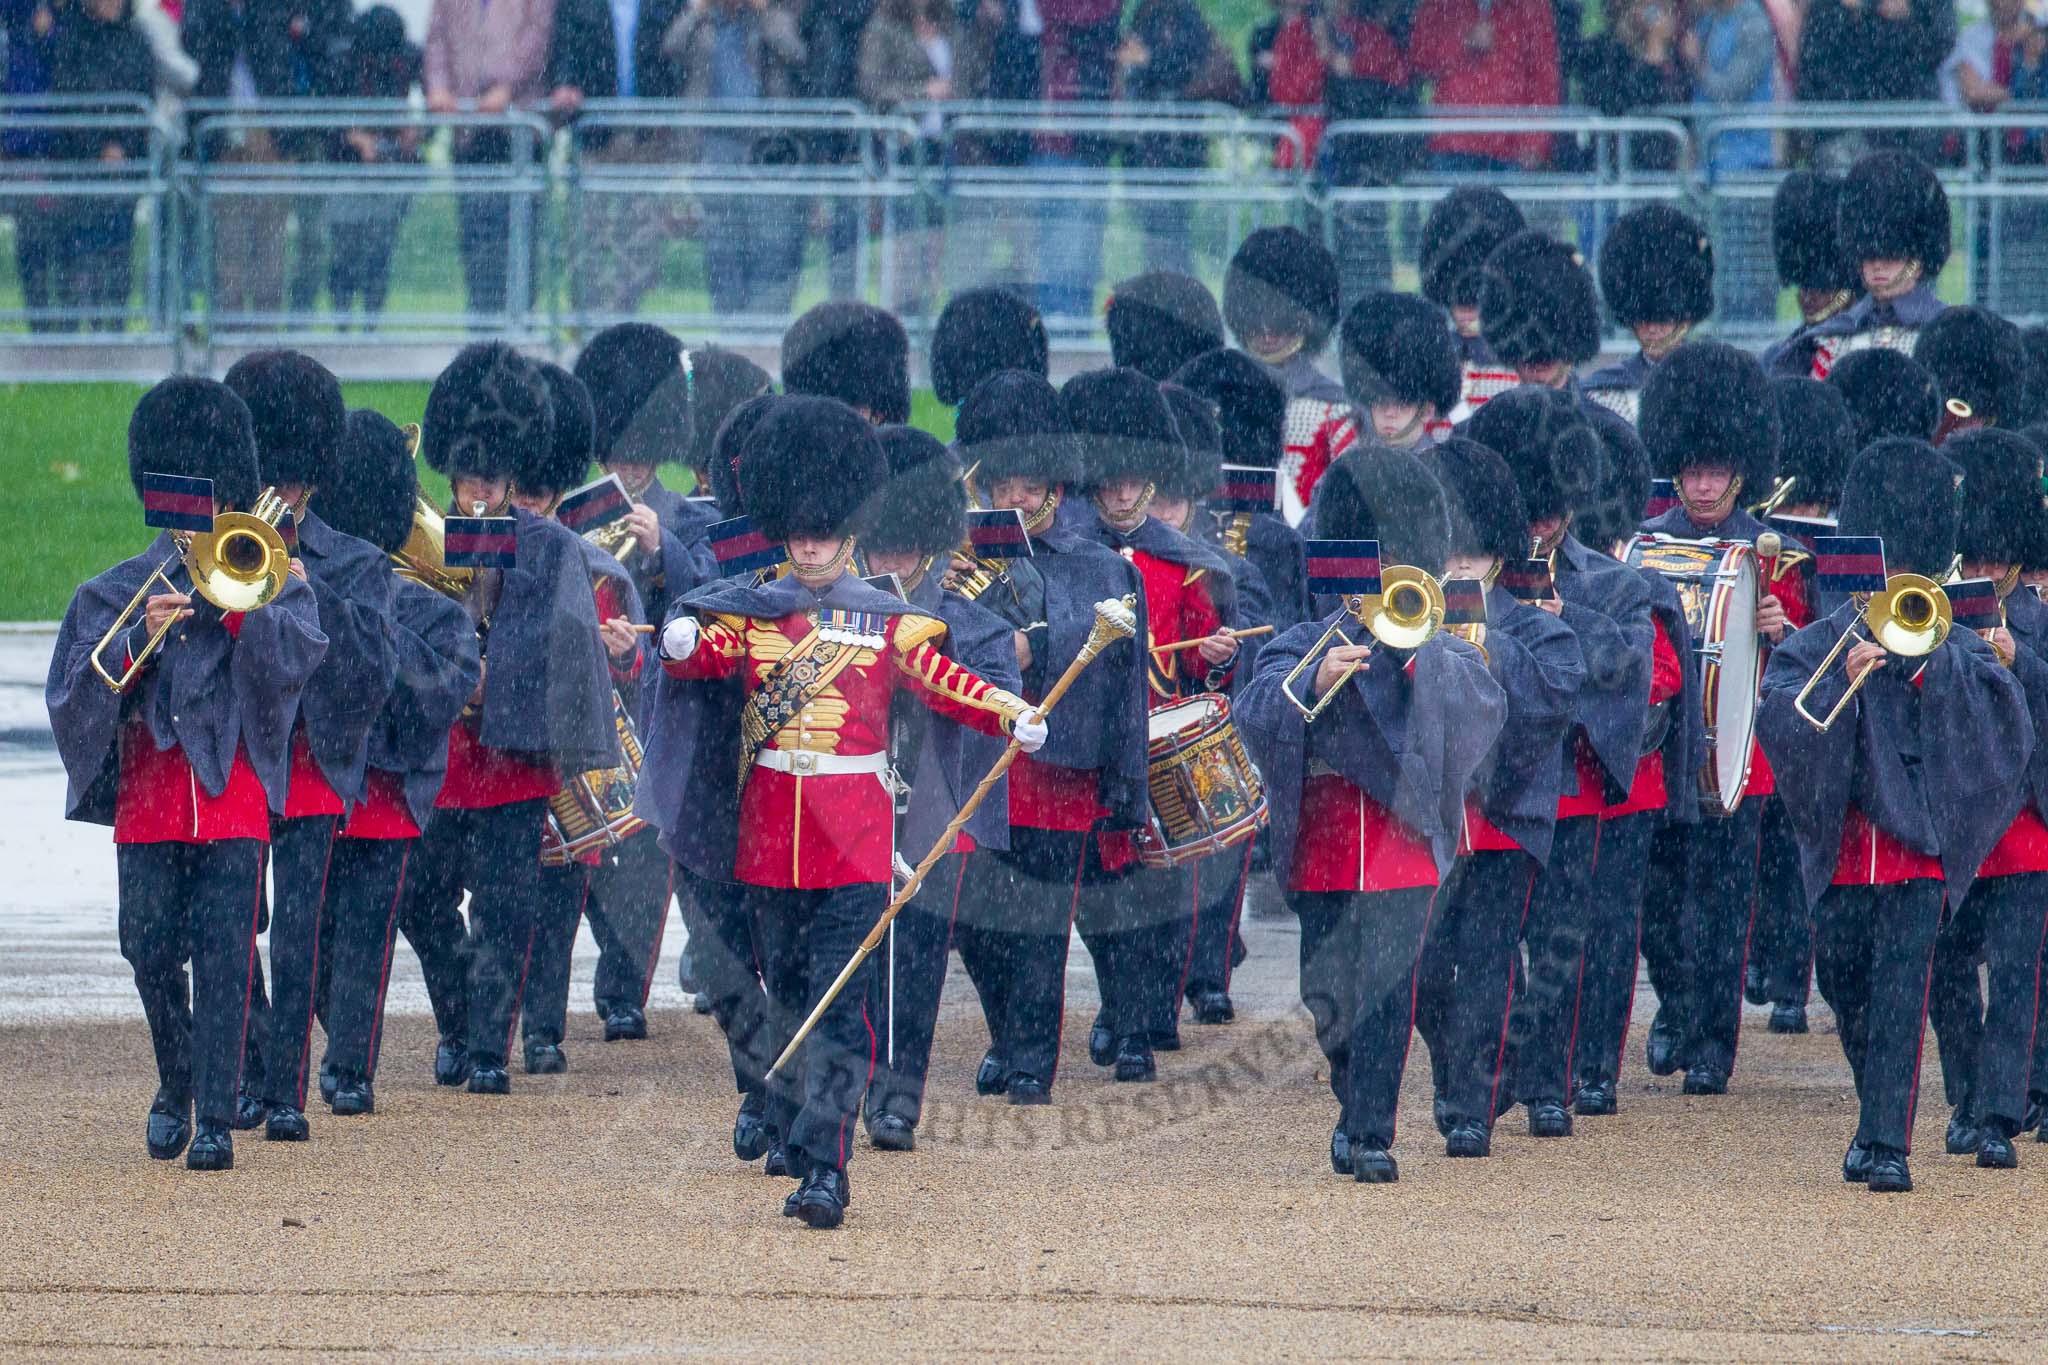 The Colonel's Review 2014.
Horse Guards Parade, Westminster,
London,

United Kingdom,
on 07 June 2014 at 10:02, image #38